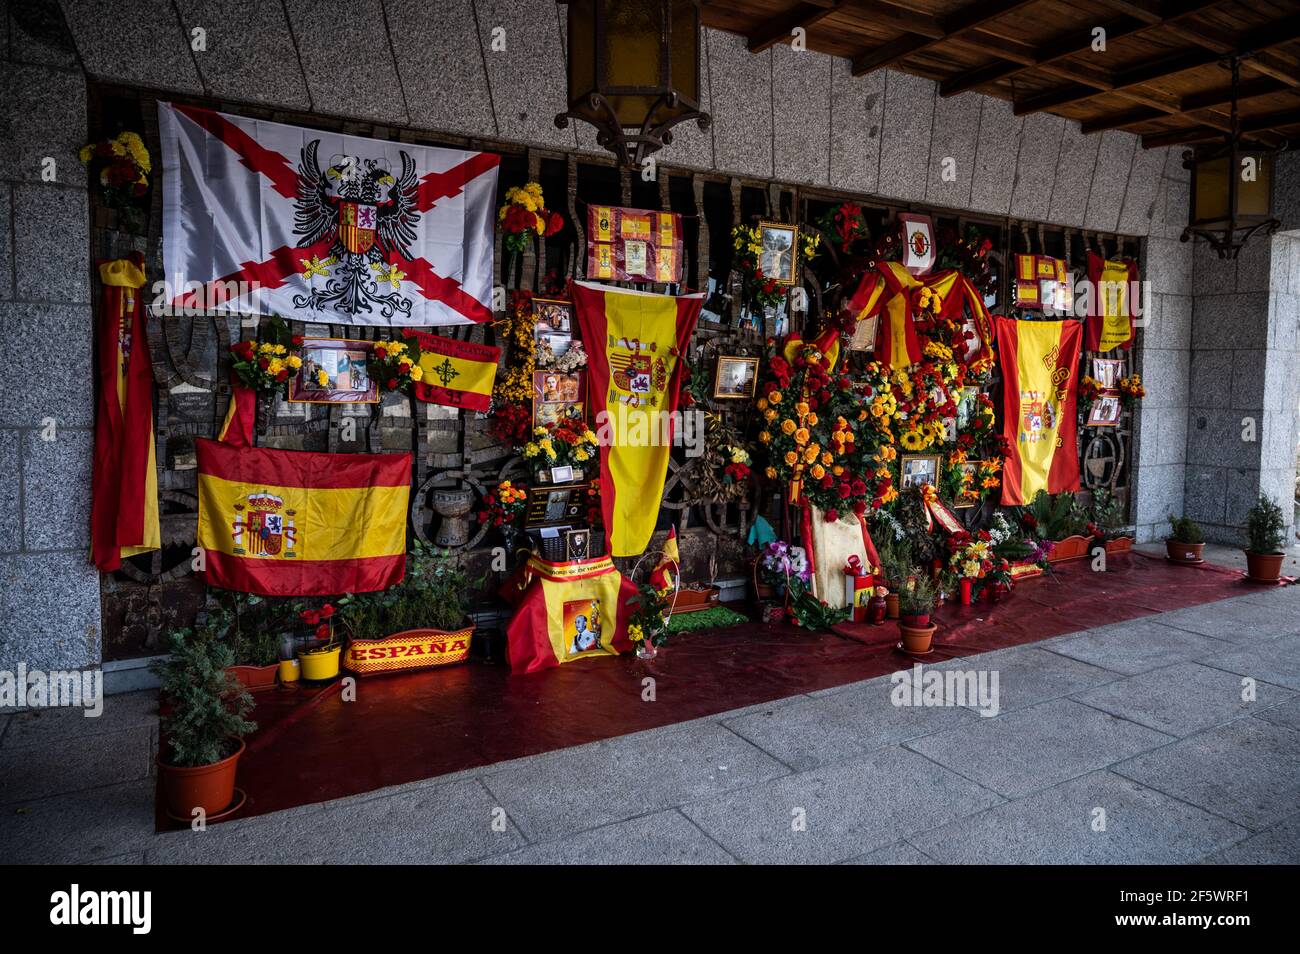 Madrid, Spain. 28th Mar, 2021. Flags, pictures and flowers placed outside the pantheon containing the tomb of Franco dictator at El Pardo Mingorrubio cemetery during a gathering of far right wing supporters for the commemoration of the 82nd anniversary when dictator Francisco Franco and his forces entered Madrid following the Spanish Coup of July 1936 against the 2nd Spanish Republic. Credit: Marcos del Mazo/Alamy Live News Stock Photo